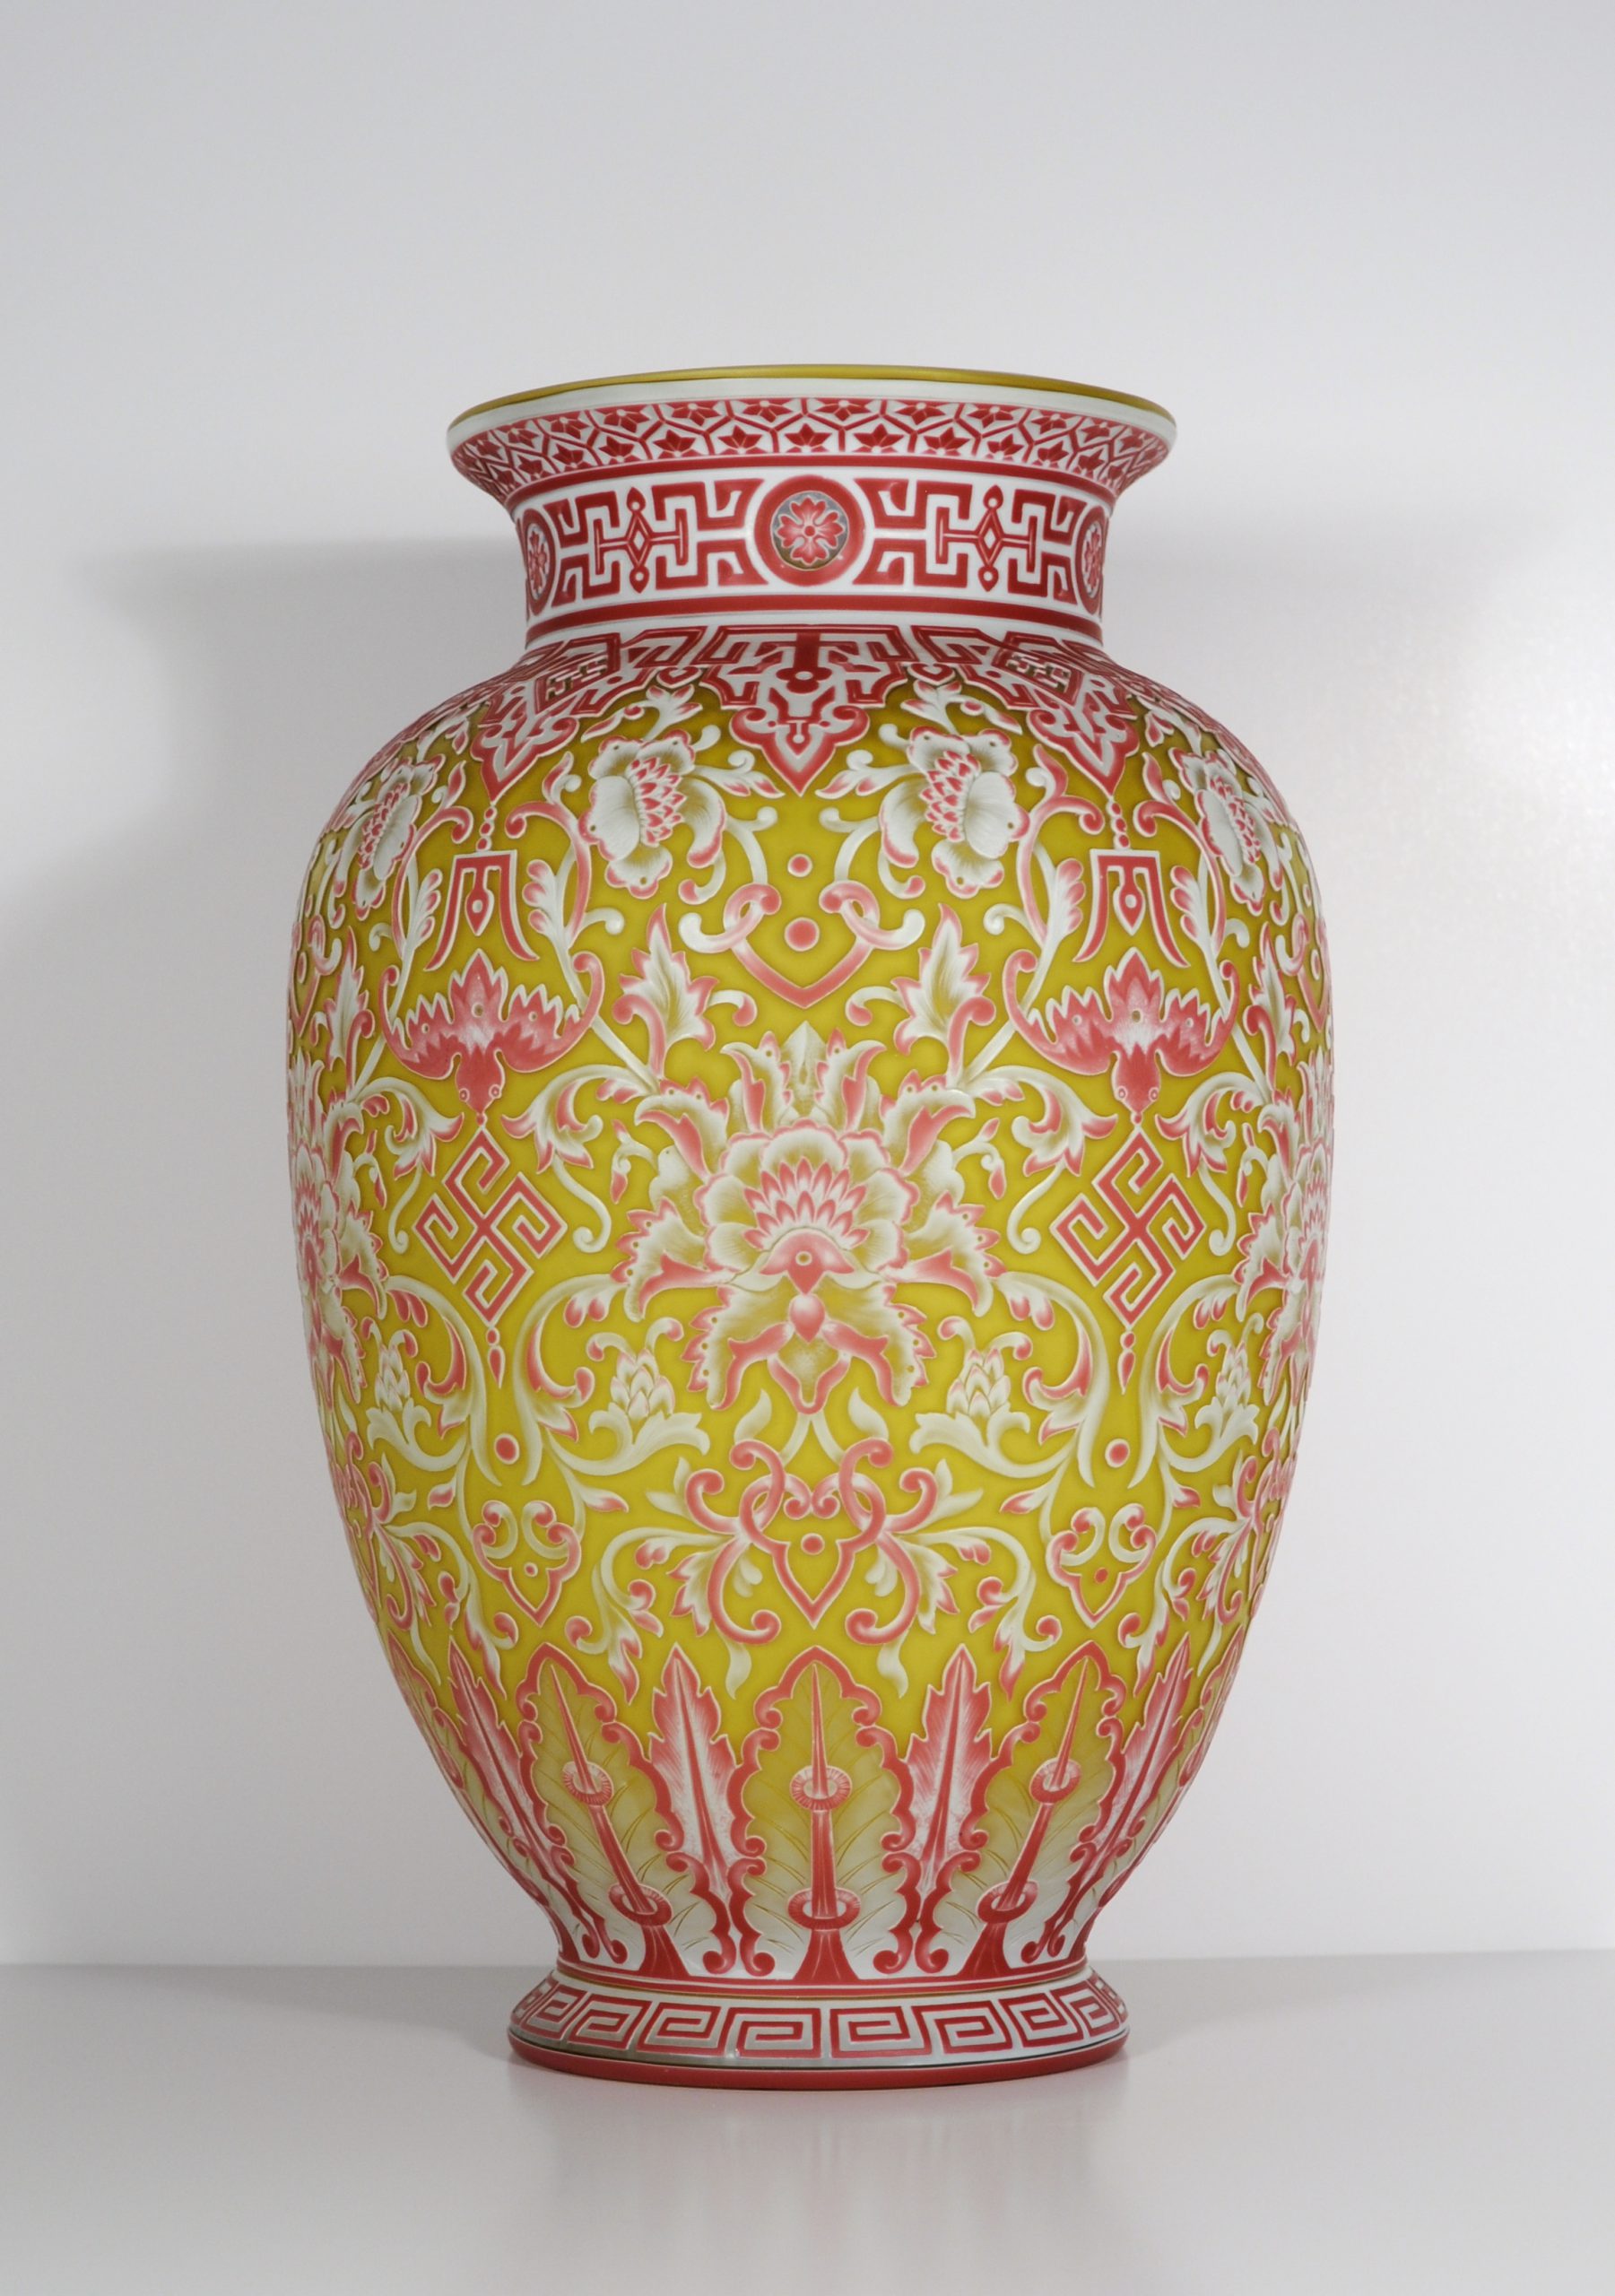 Footed  Urn-shaped Vase.  English Cameo Glass.  Red on white on citron on white on ivory. A rare 5 layer vase with Asian inspired floral tapestry motif. A repeating design made of stylized flowers, bats and Chinese symbols.